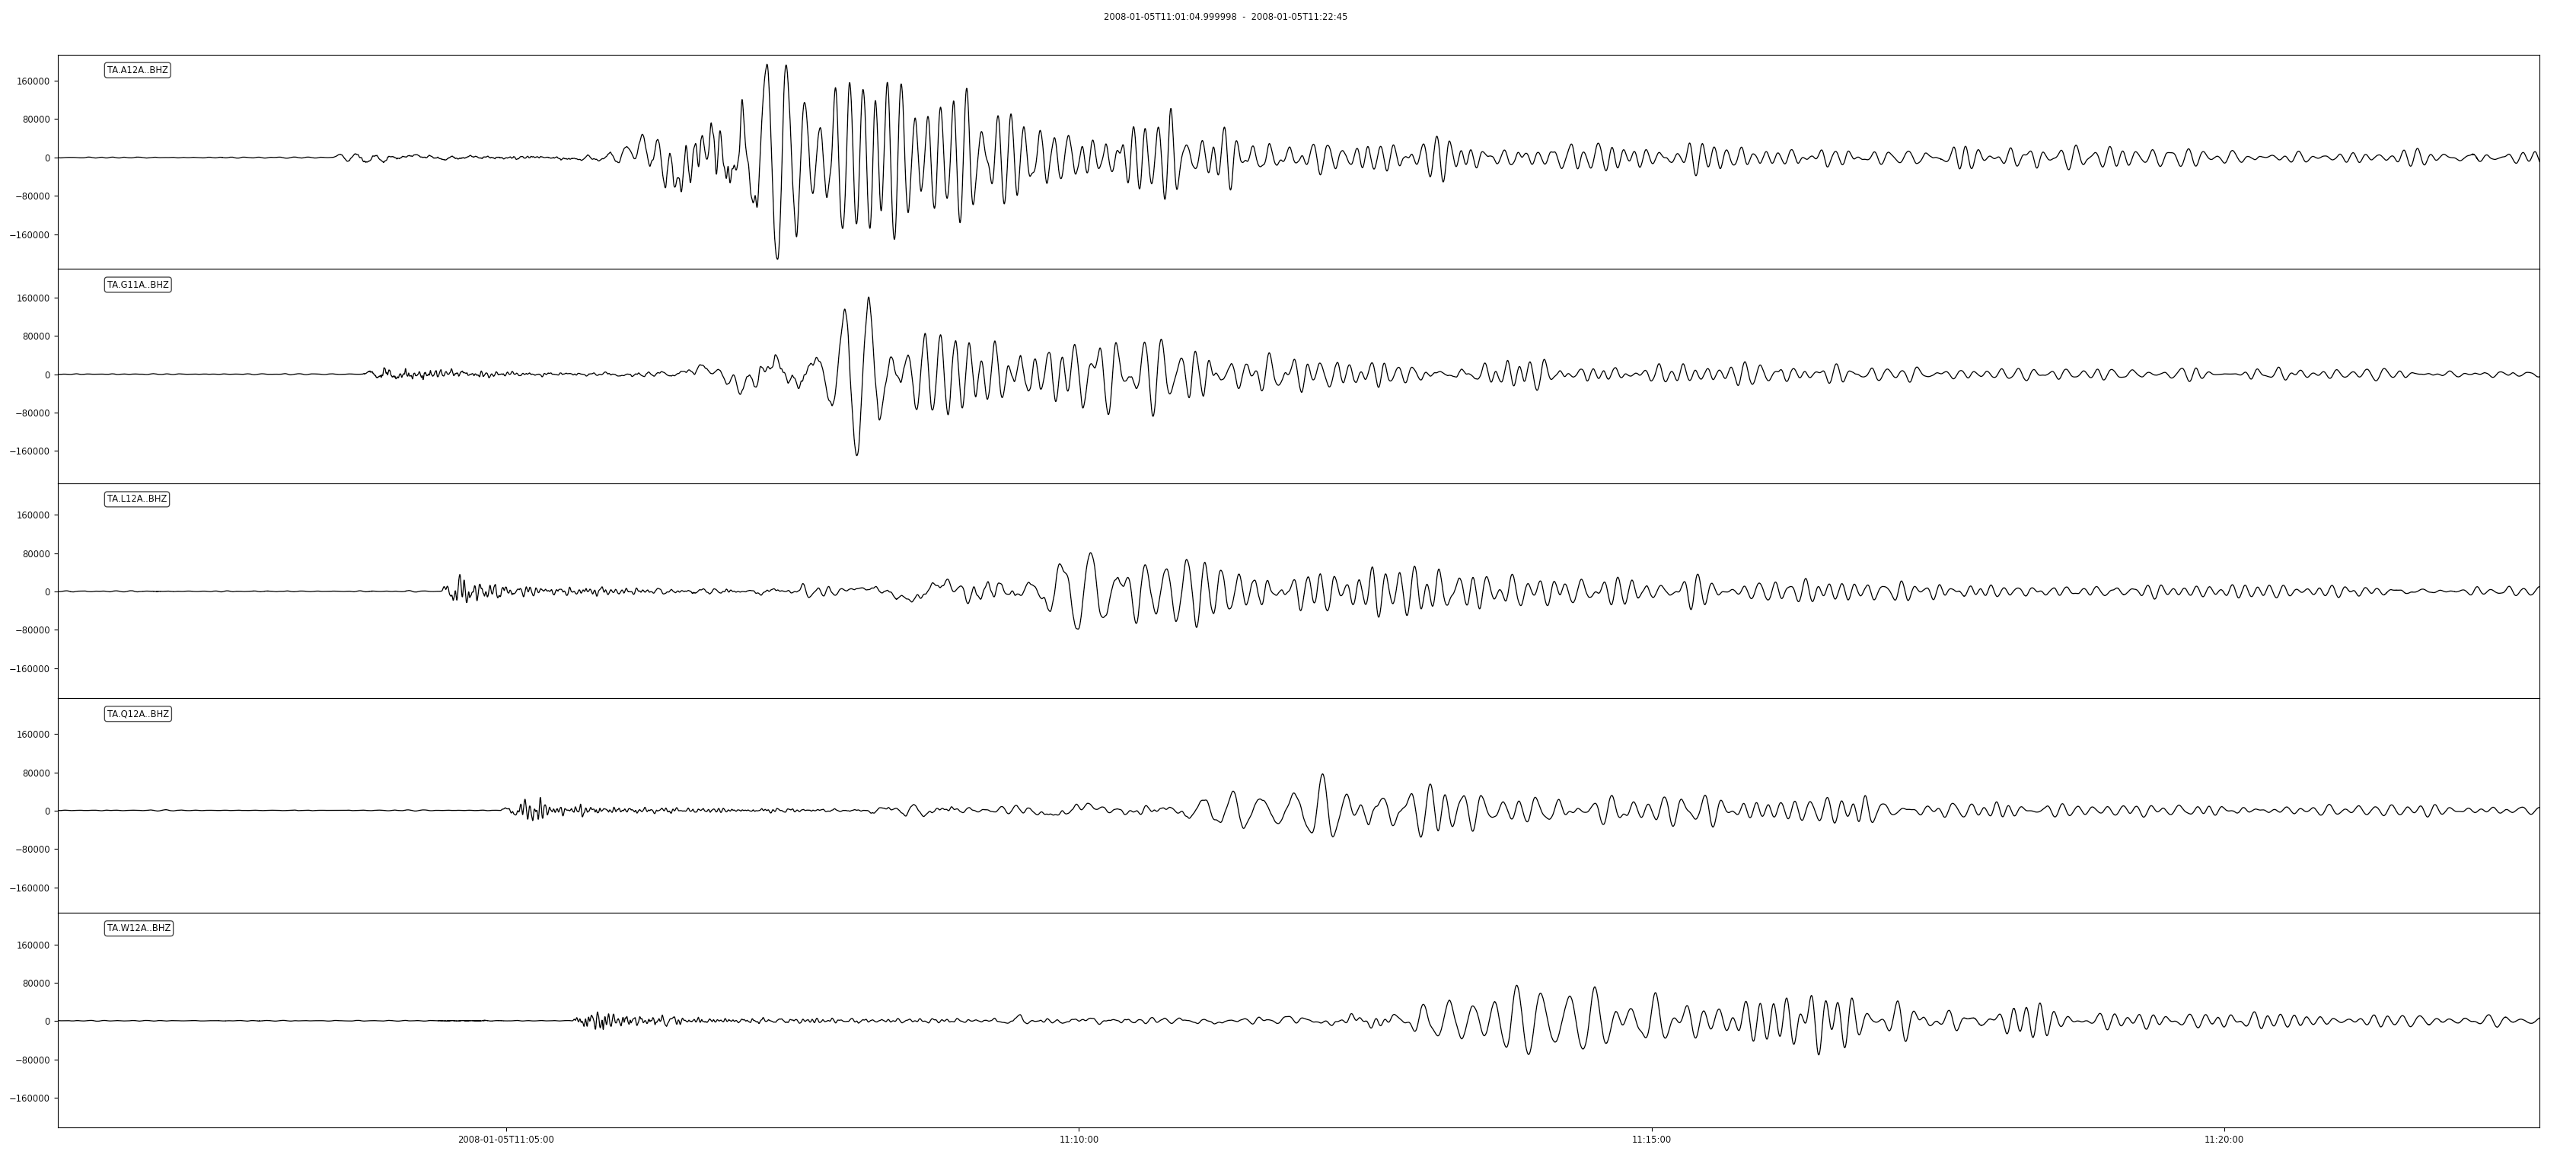 Signal from the M6.5, Queen Charlotte Islands earthquake, origin time: 2008-01-05T11:01:05.55Z on selected USArray TA stations